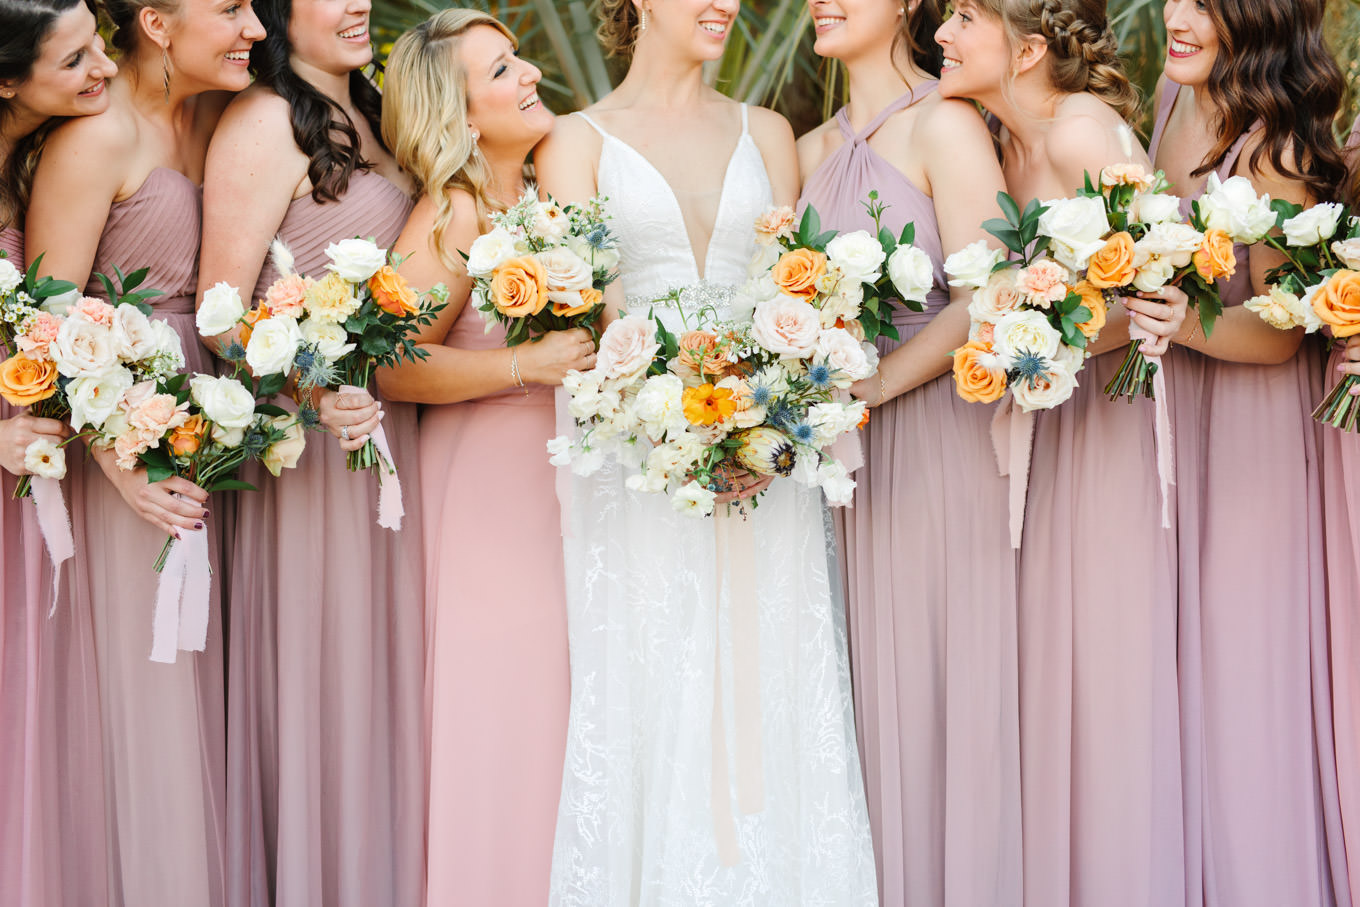 Bridesmaids in mismatched blush and mauve dresses | Living Desert Zoo & Gardens wedding with unique details | Elevated and colorful wedding photography for fun-loving couples in Southern California |  #PalmSprings #palmspringsphotographer #gardenwedding #palmspringswedding  Source: Mary Costa Photography | Los Angeles wedding photographer 